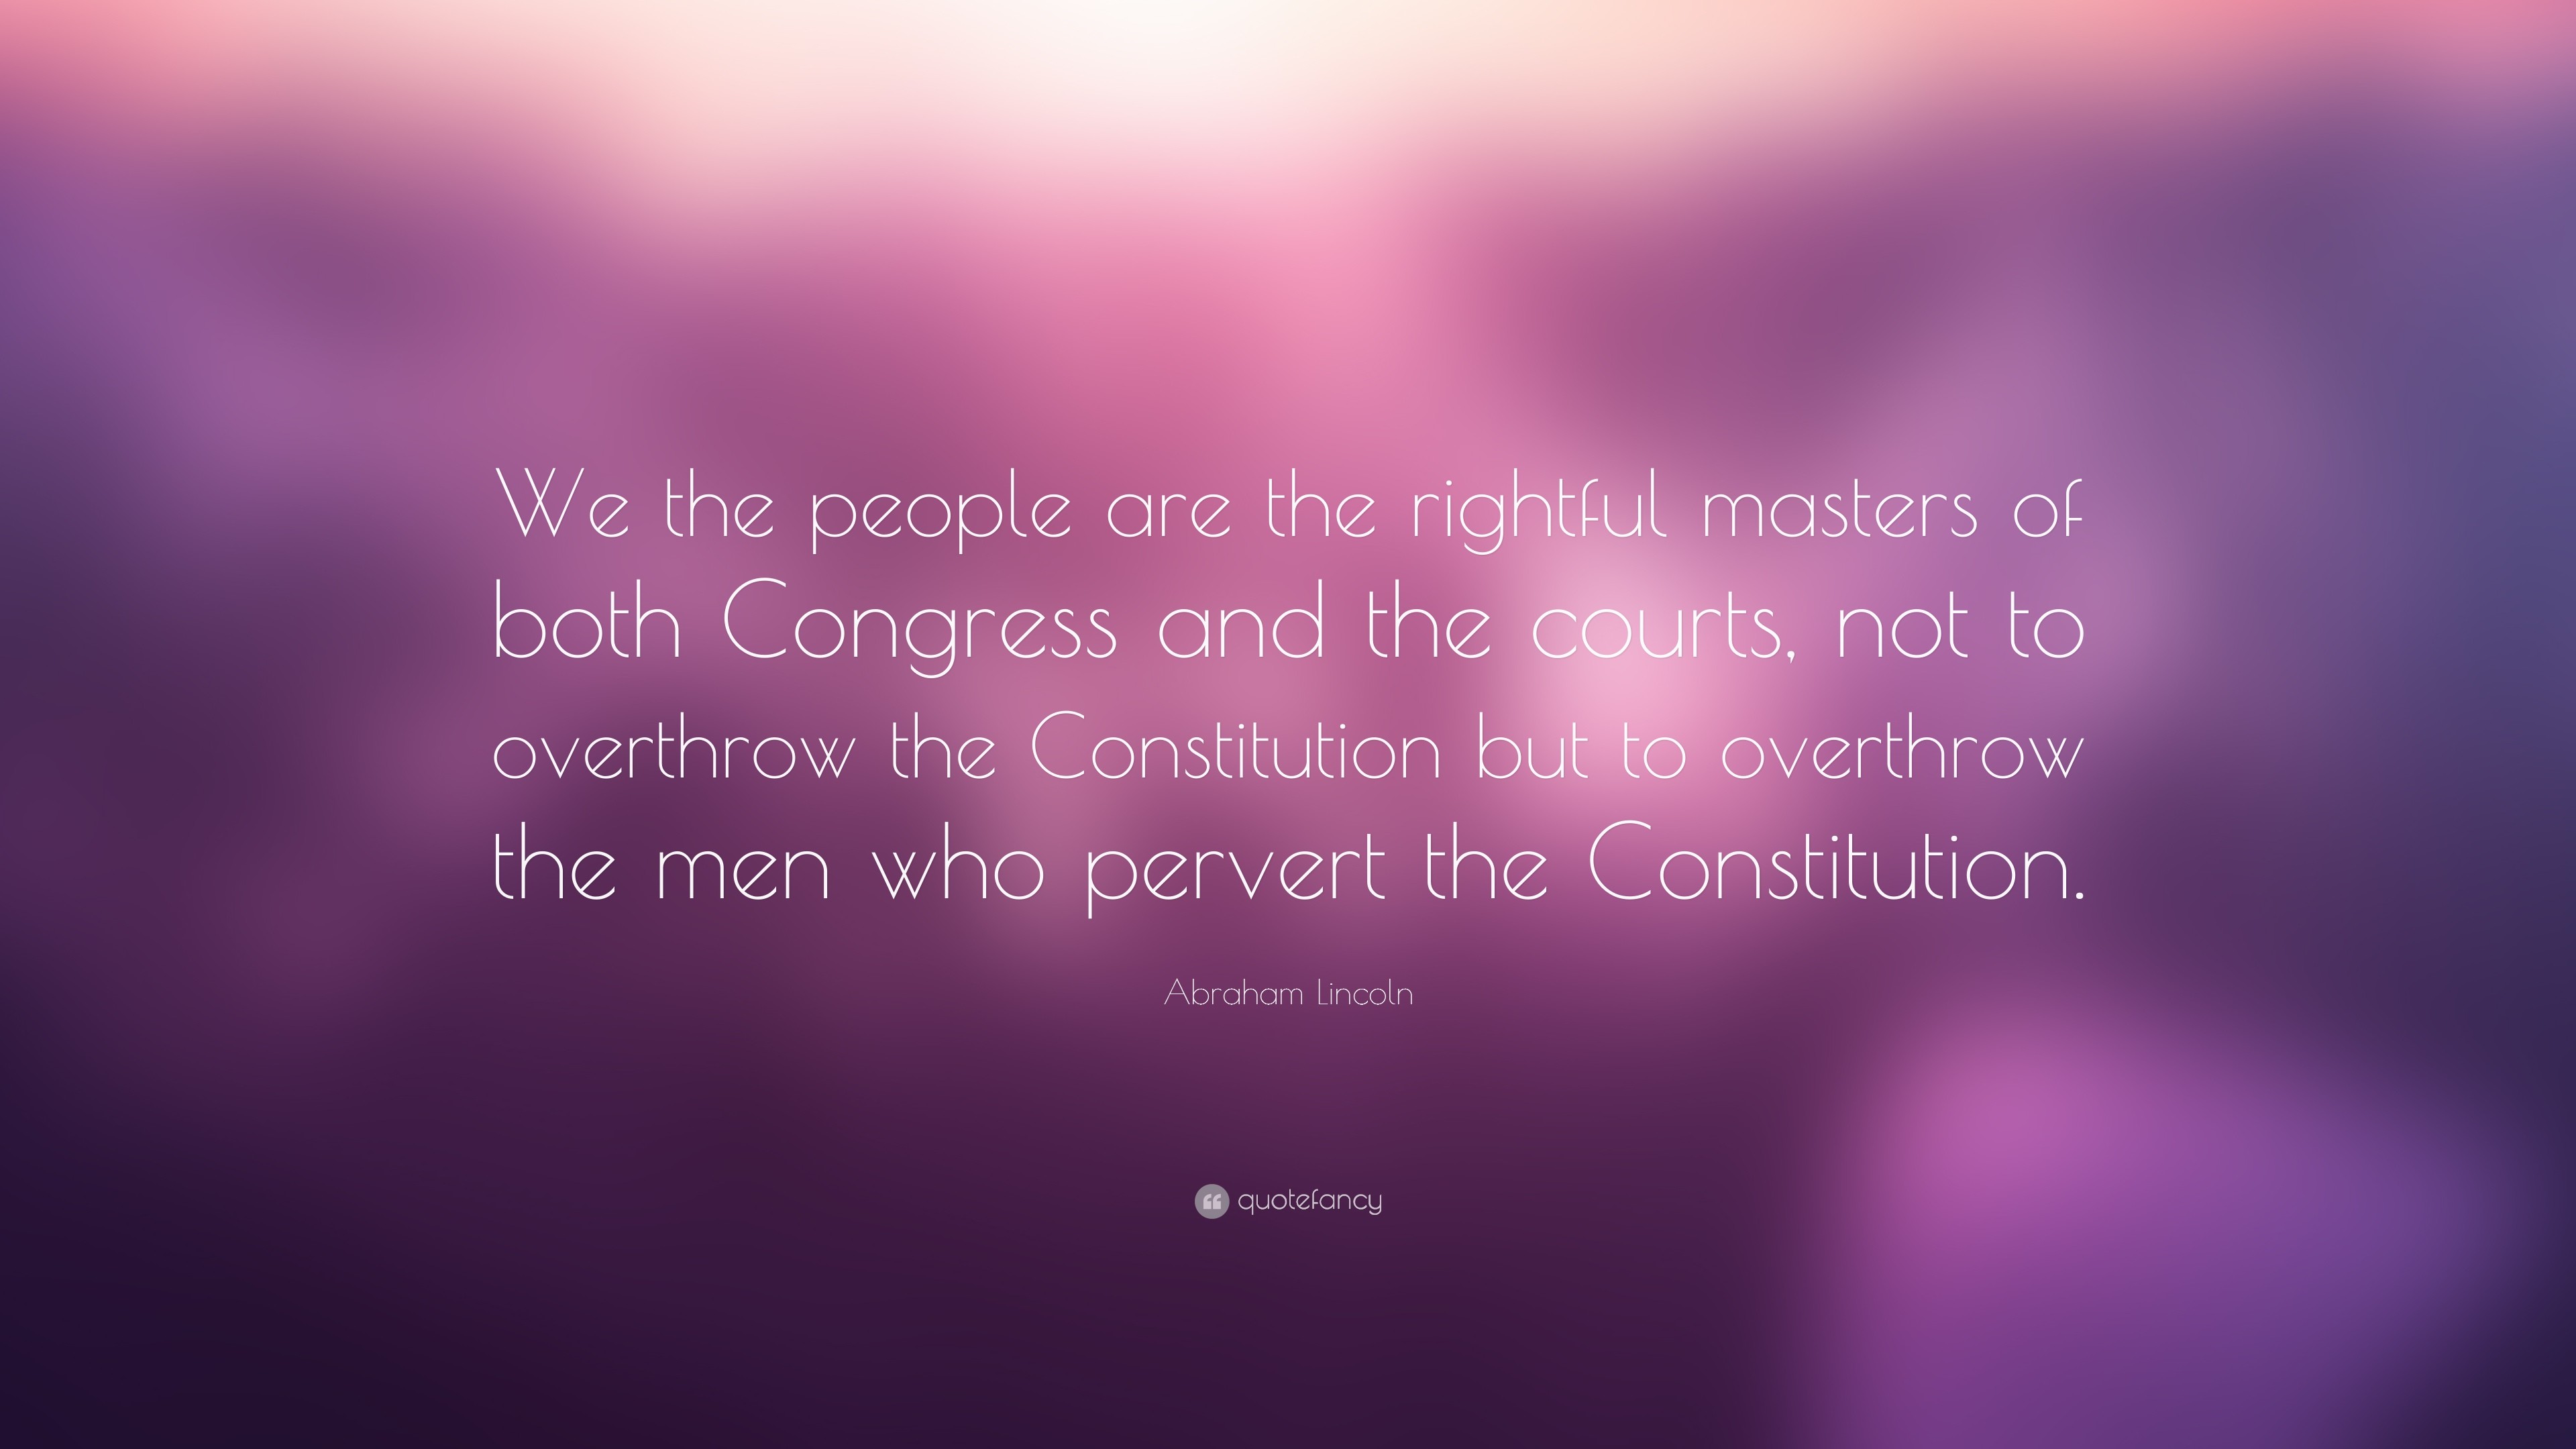 3840x2160 Abraham Lincoln Quote: “We the people are the rightful masters of both  Congress and